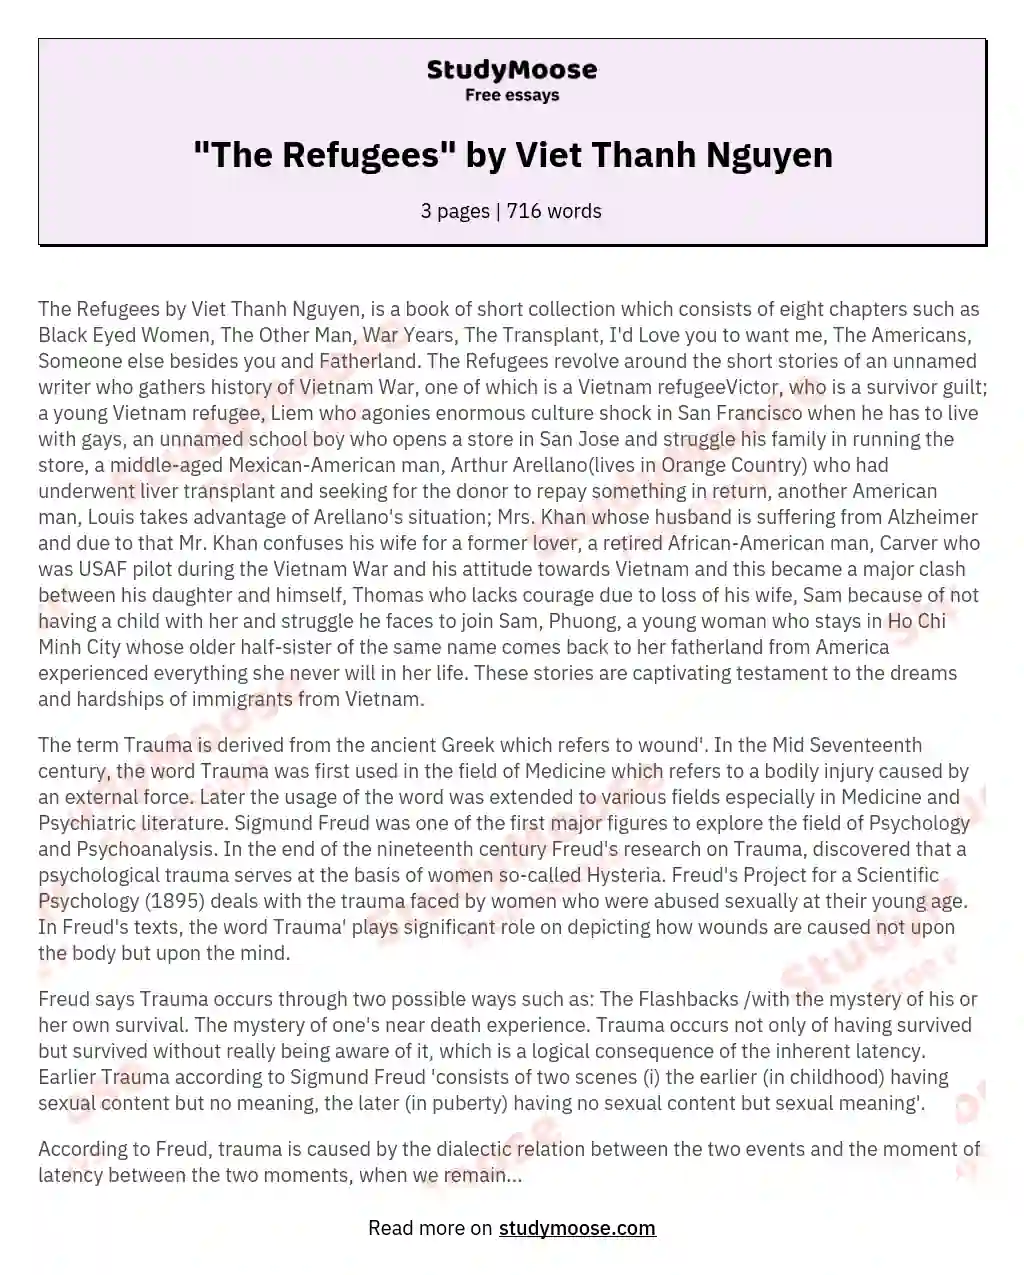 "The Refugees" by Viet Thanh Nguyen essay